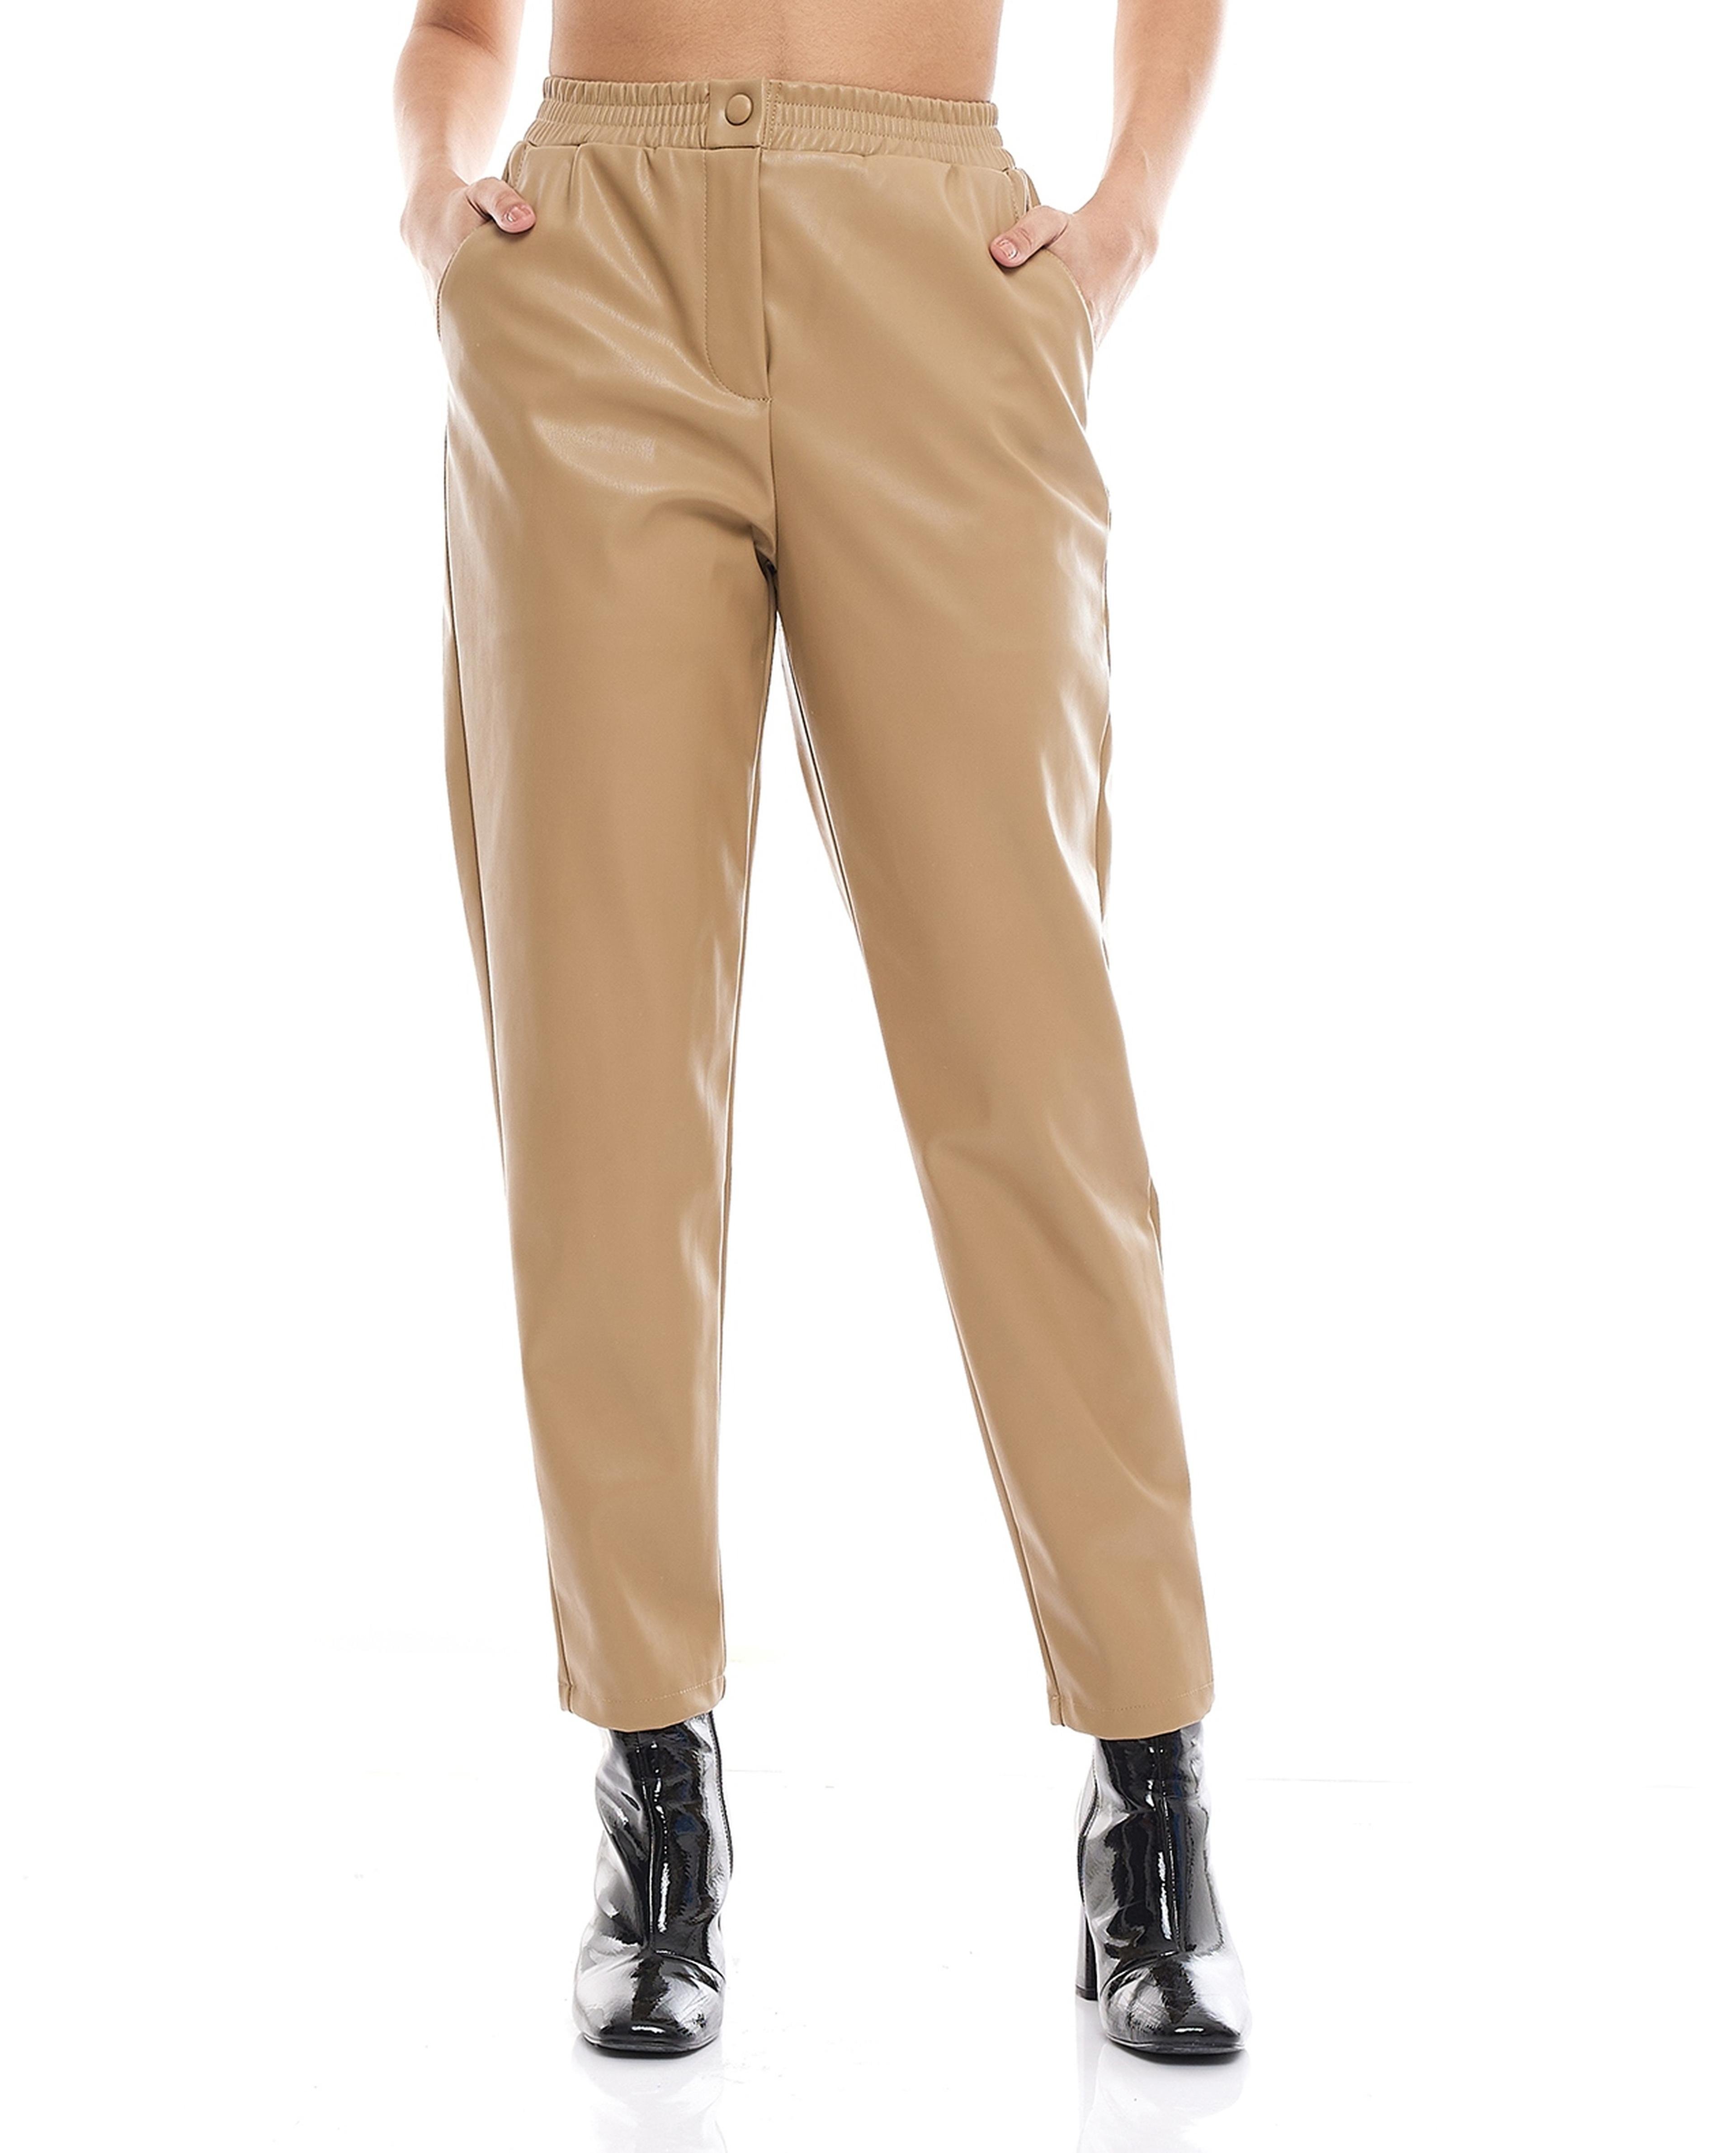 Solid Tapered pants with Button Closure